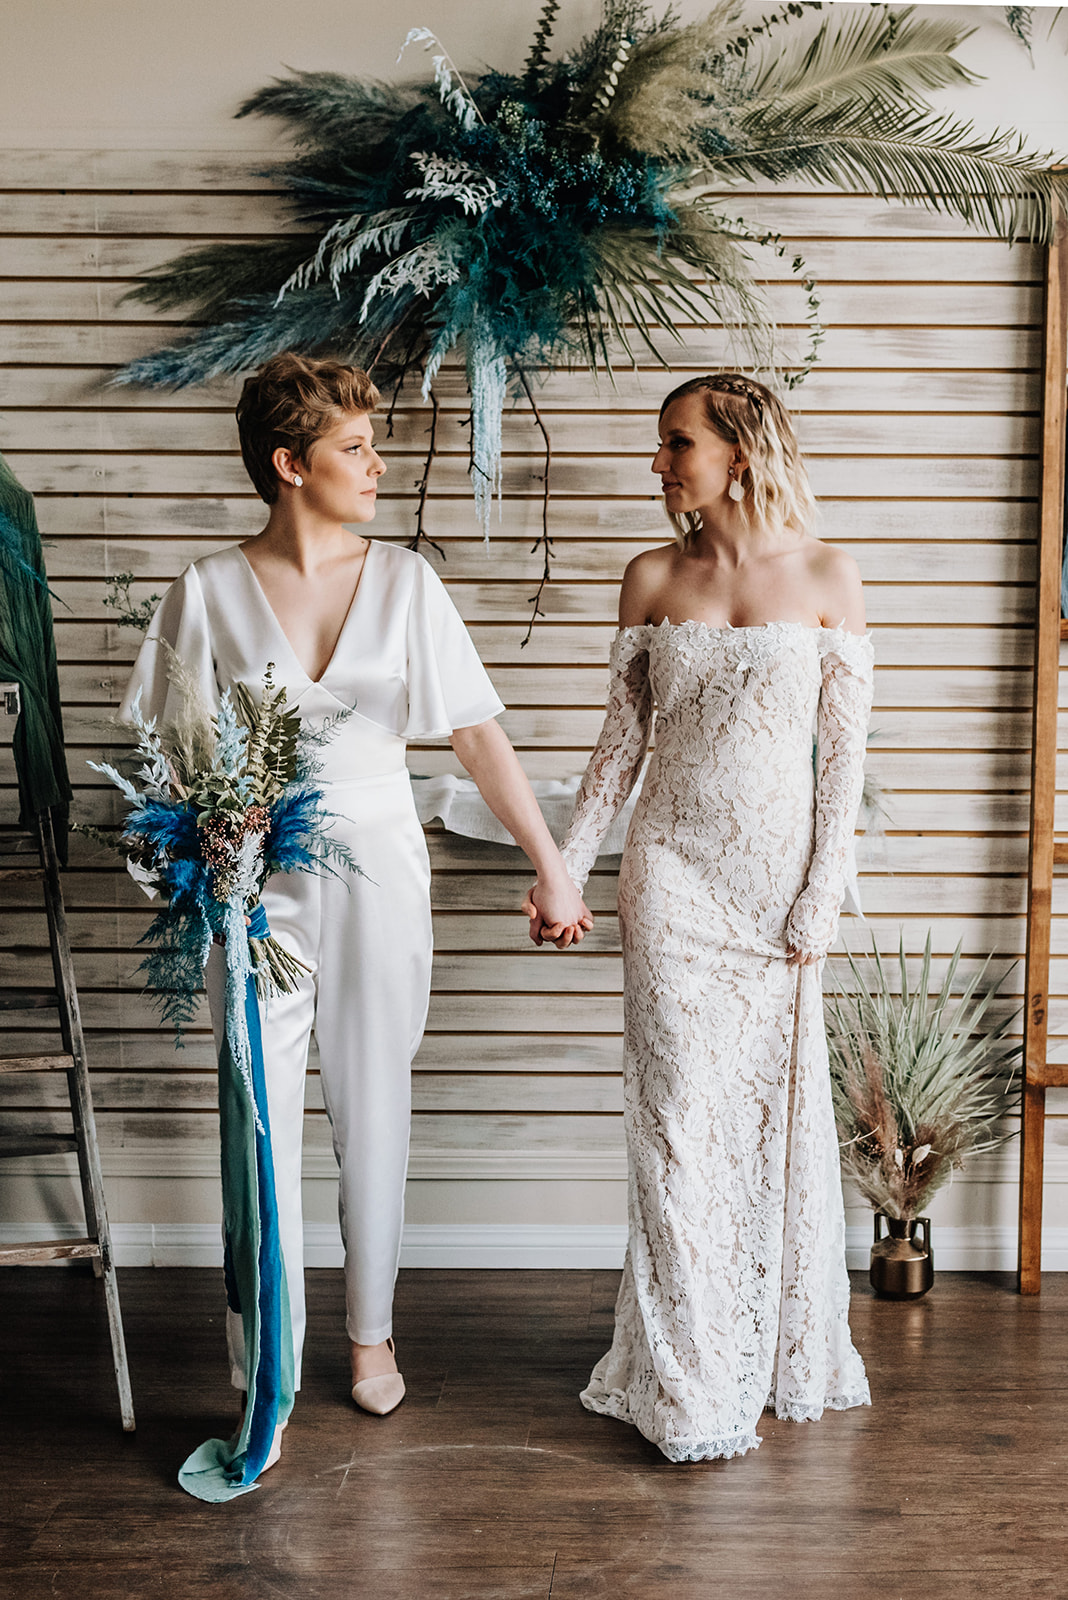 Chic brides pose hand in hand in front of their bohemian wedding decor